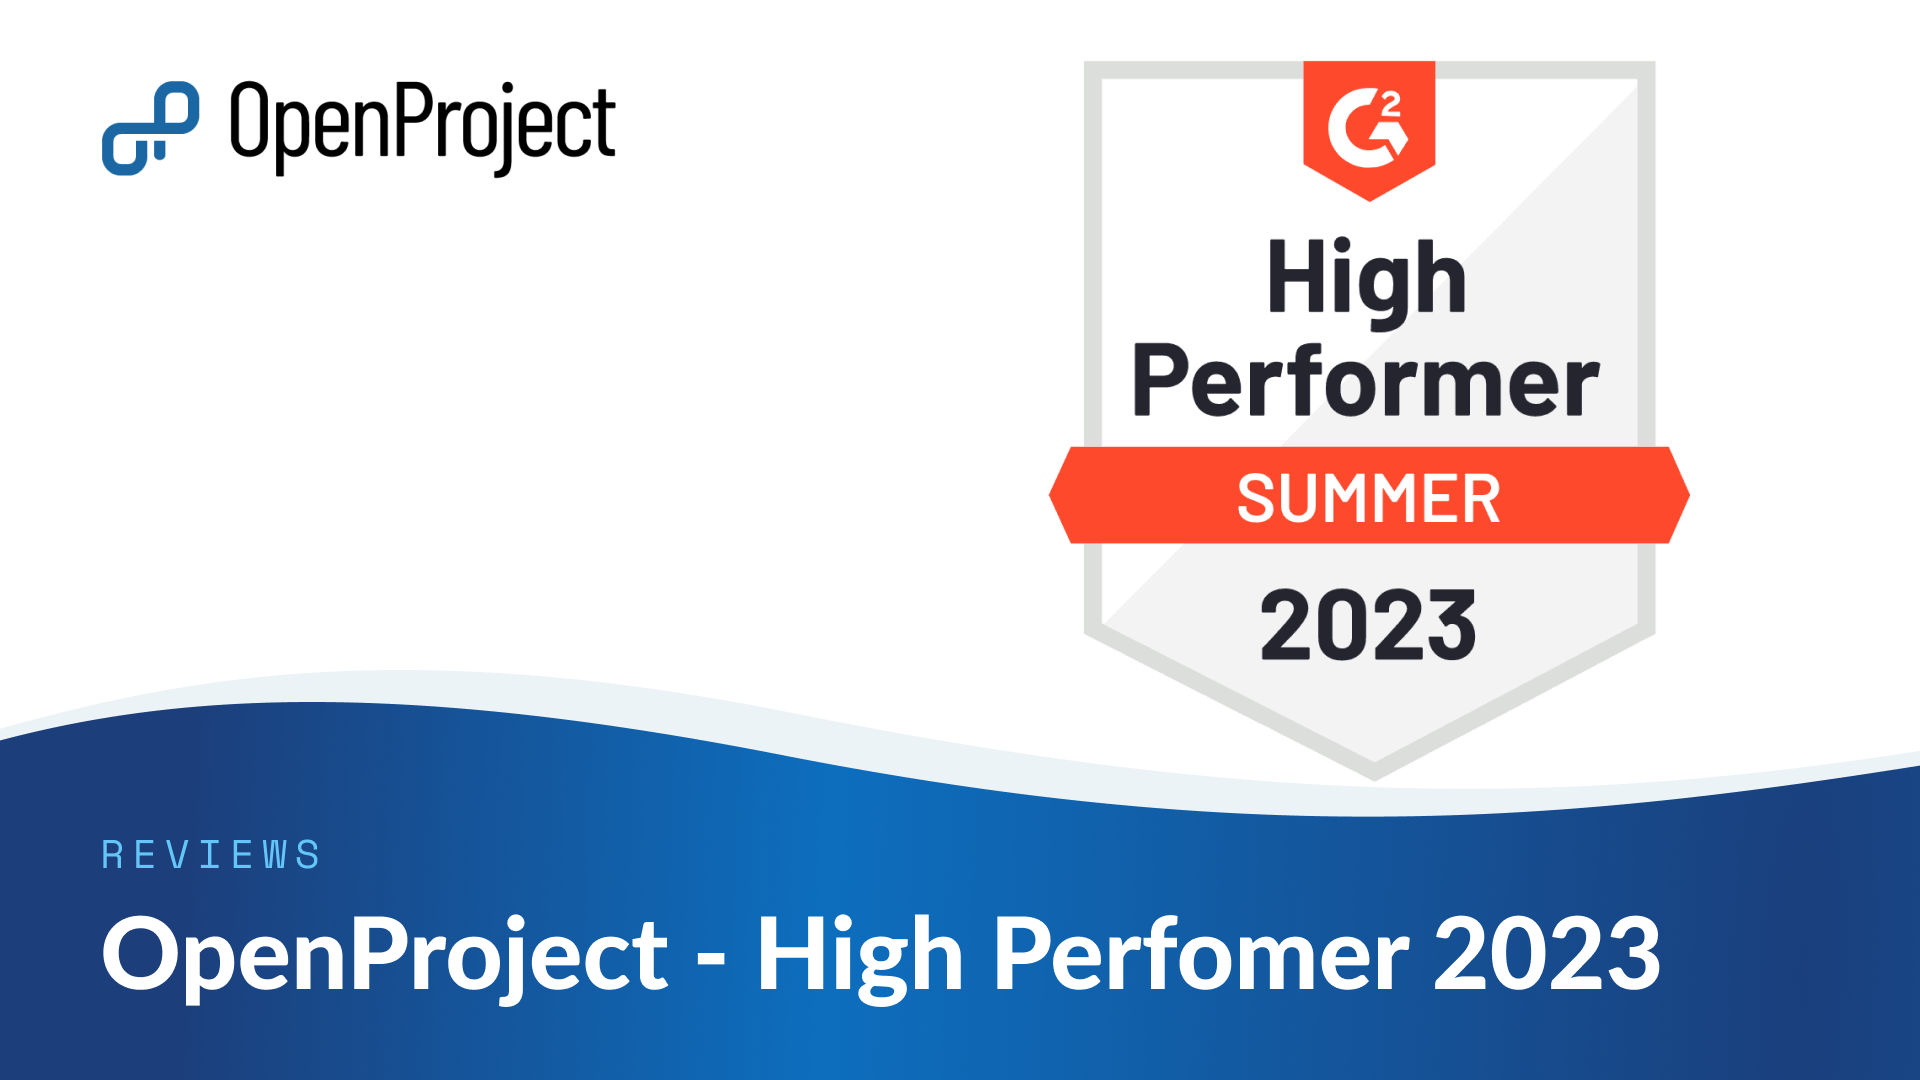 OpenProject recognized as high performer in 2023 by G2